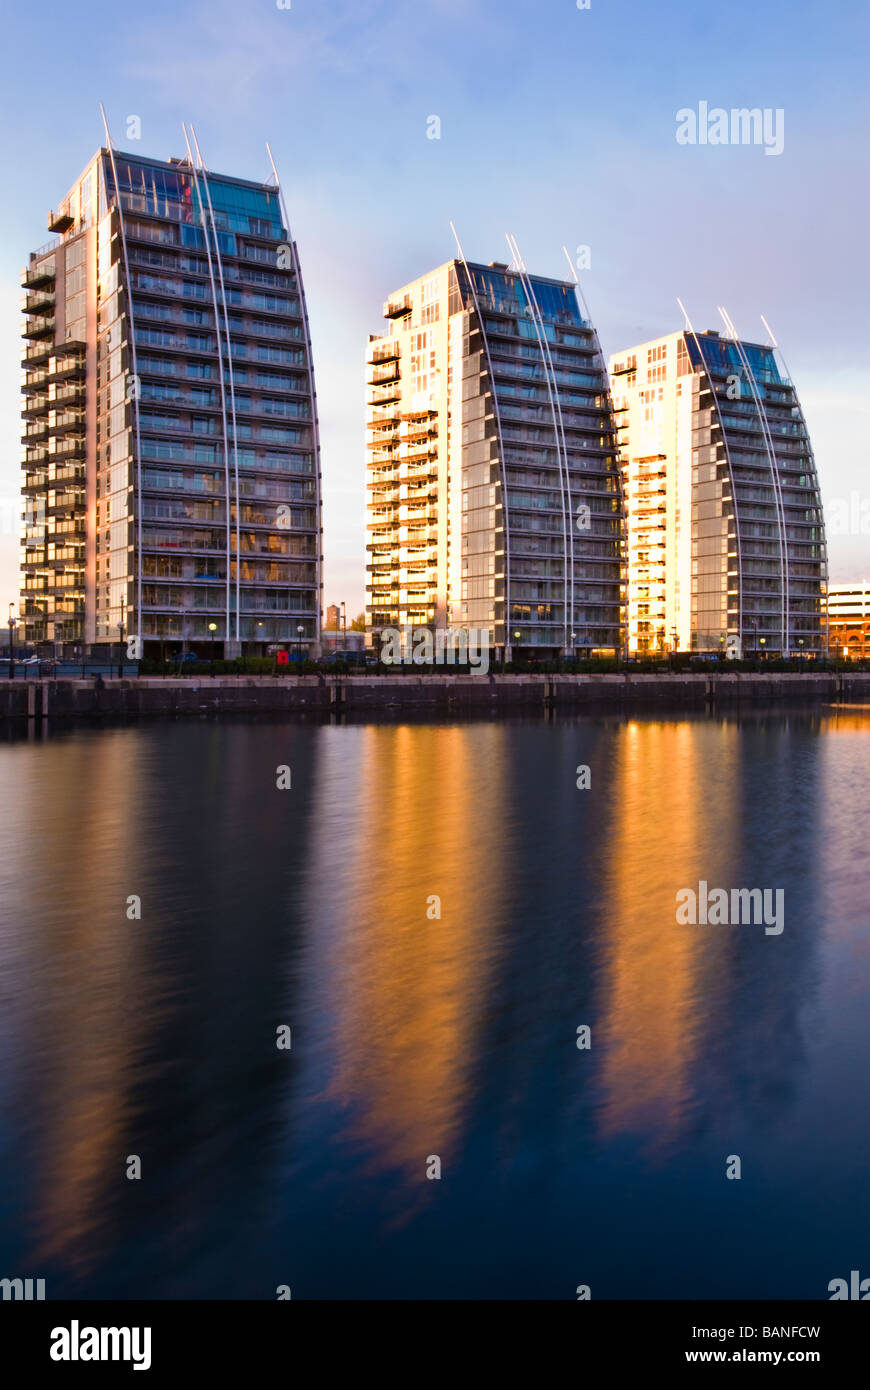 NV buildings reflected in Salford Quays docks, Manchester, England, UK Stock Photo